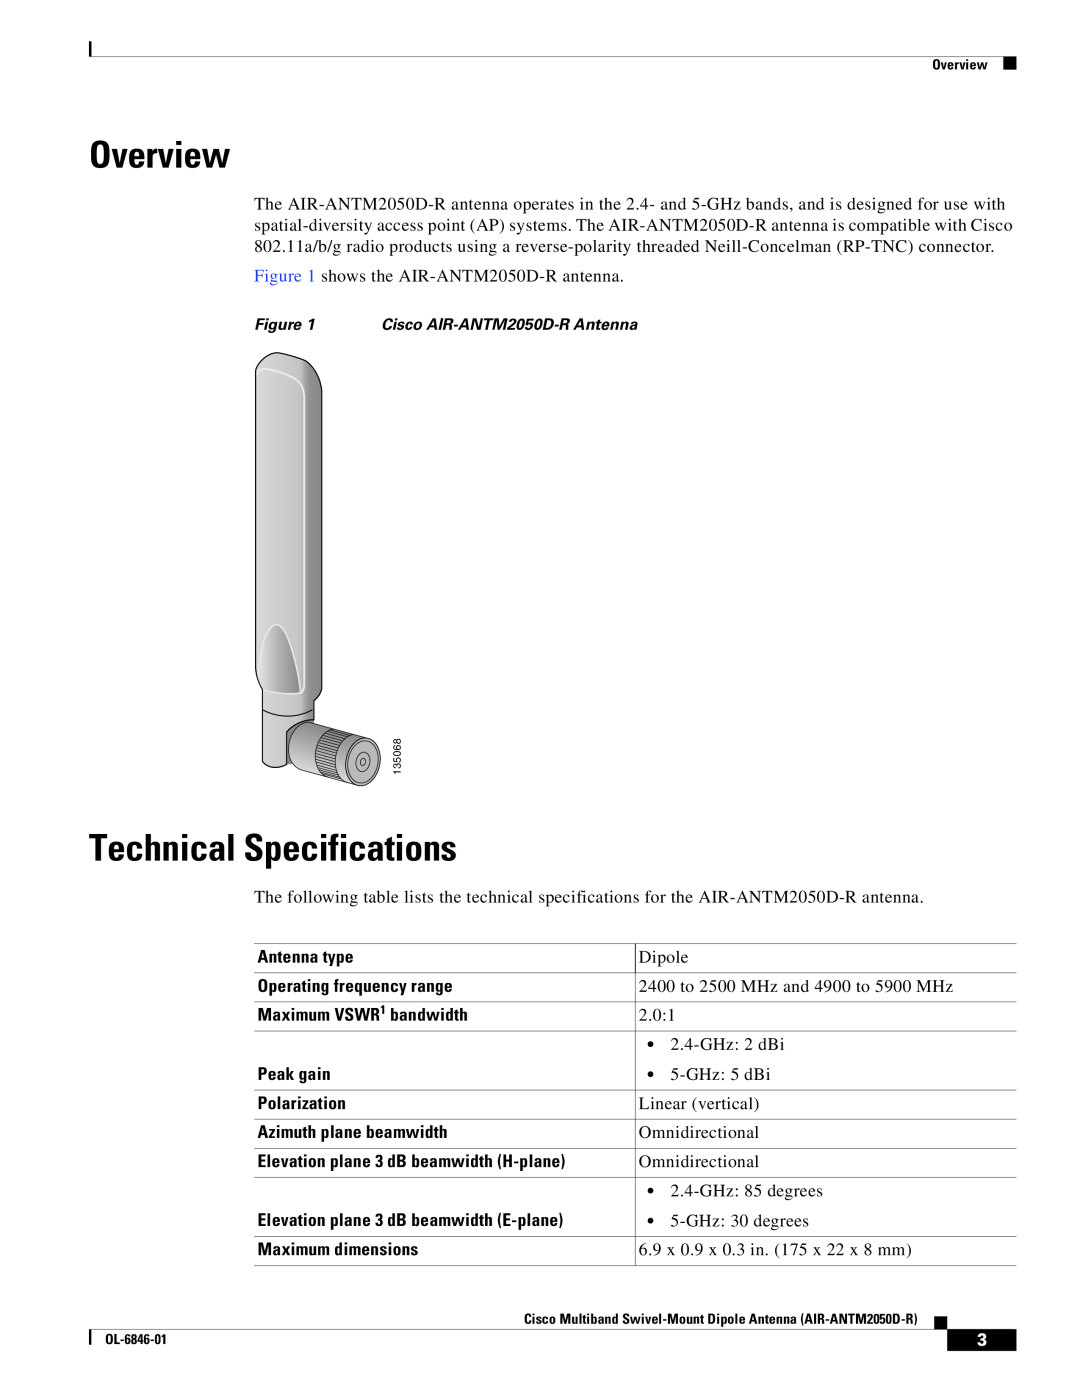 Cisco Systems AIR-ANTM2050D-R Overview, Technical Specifications, Antenna type, Operating frequency range, Peak gain 